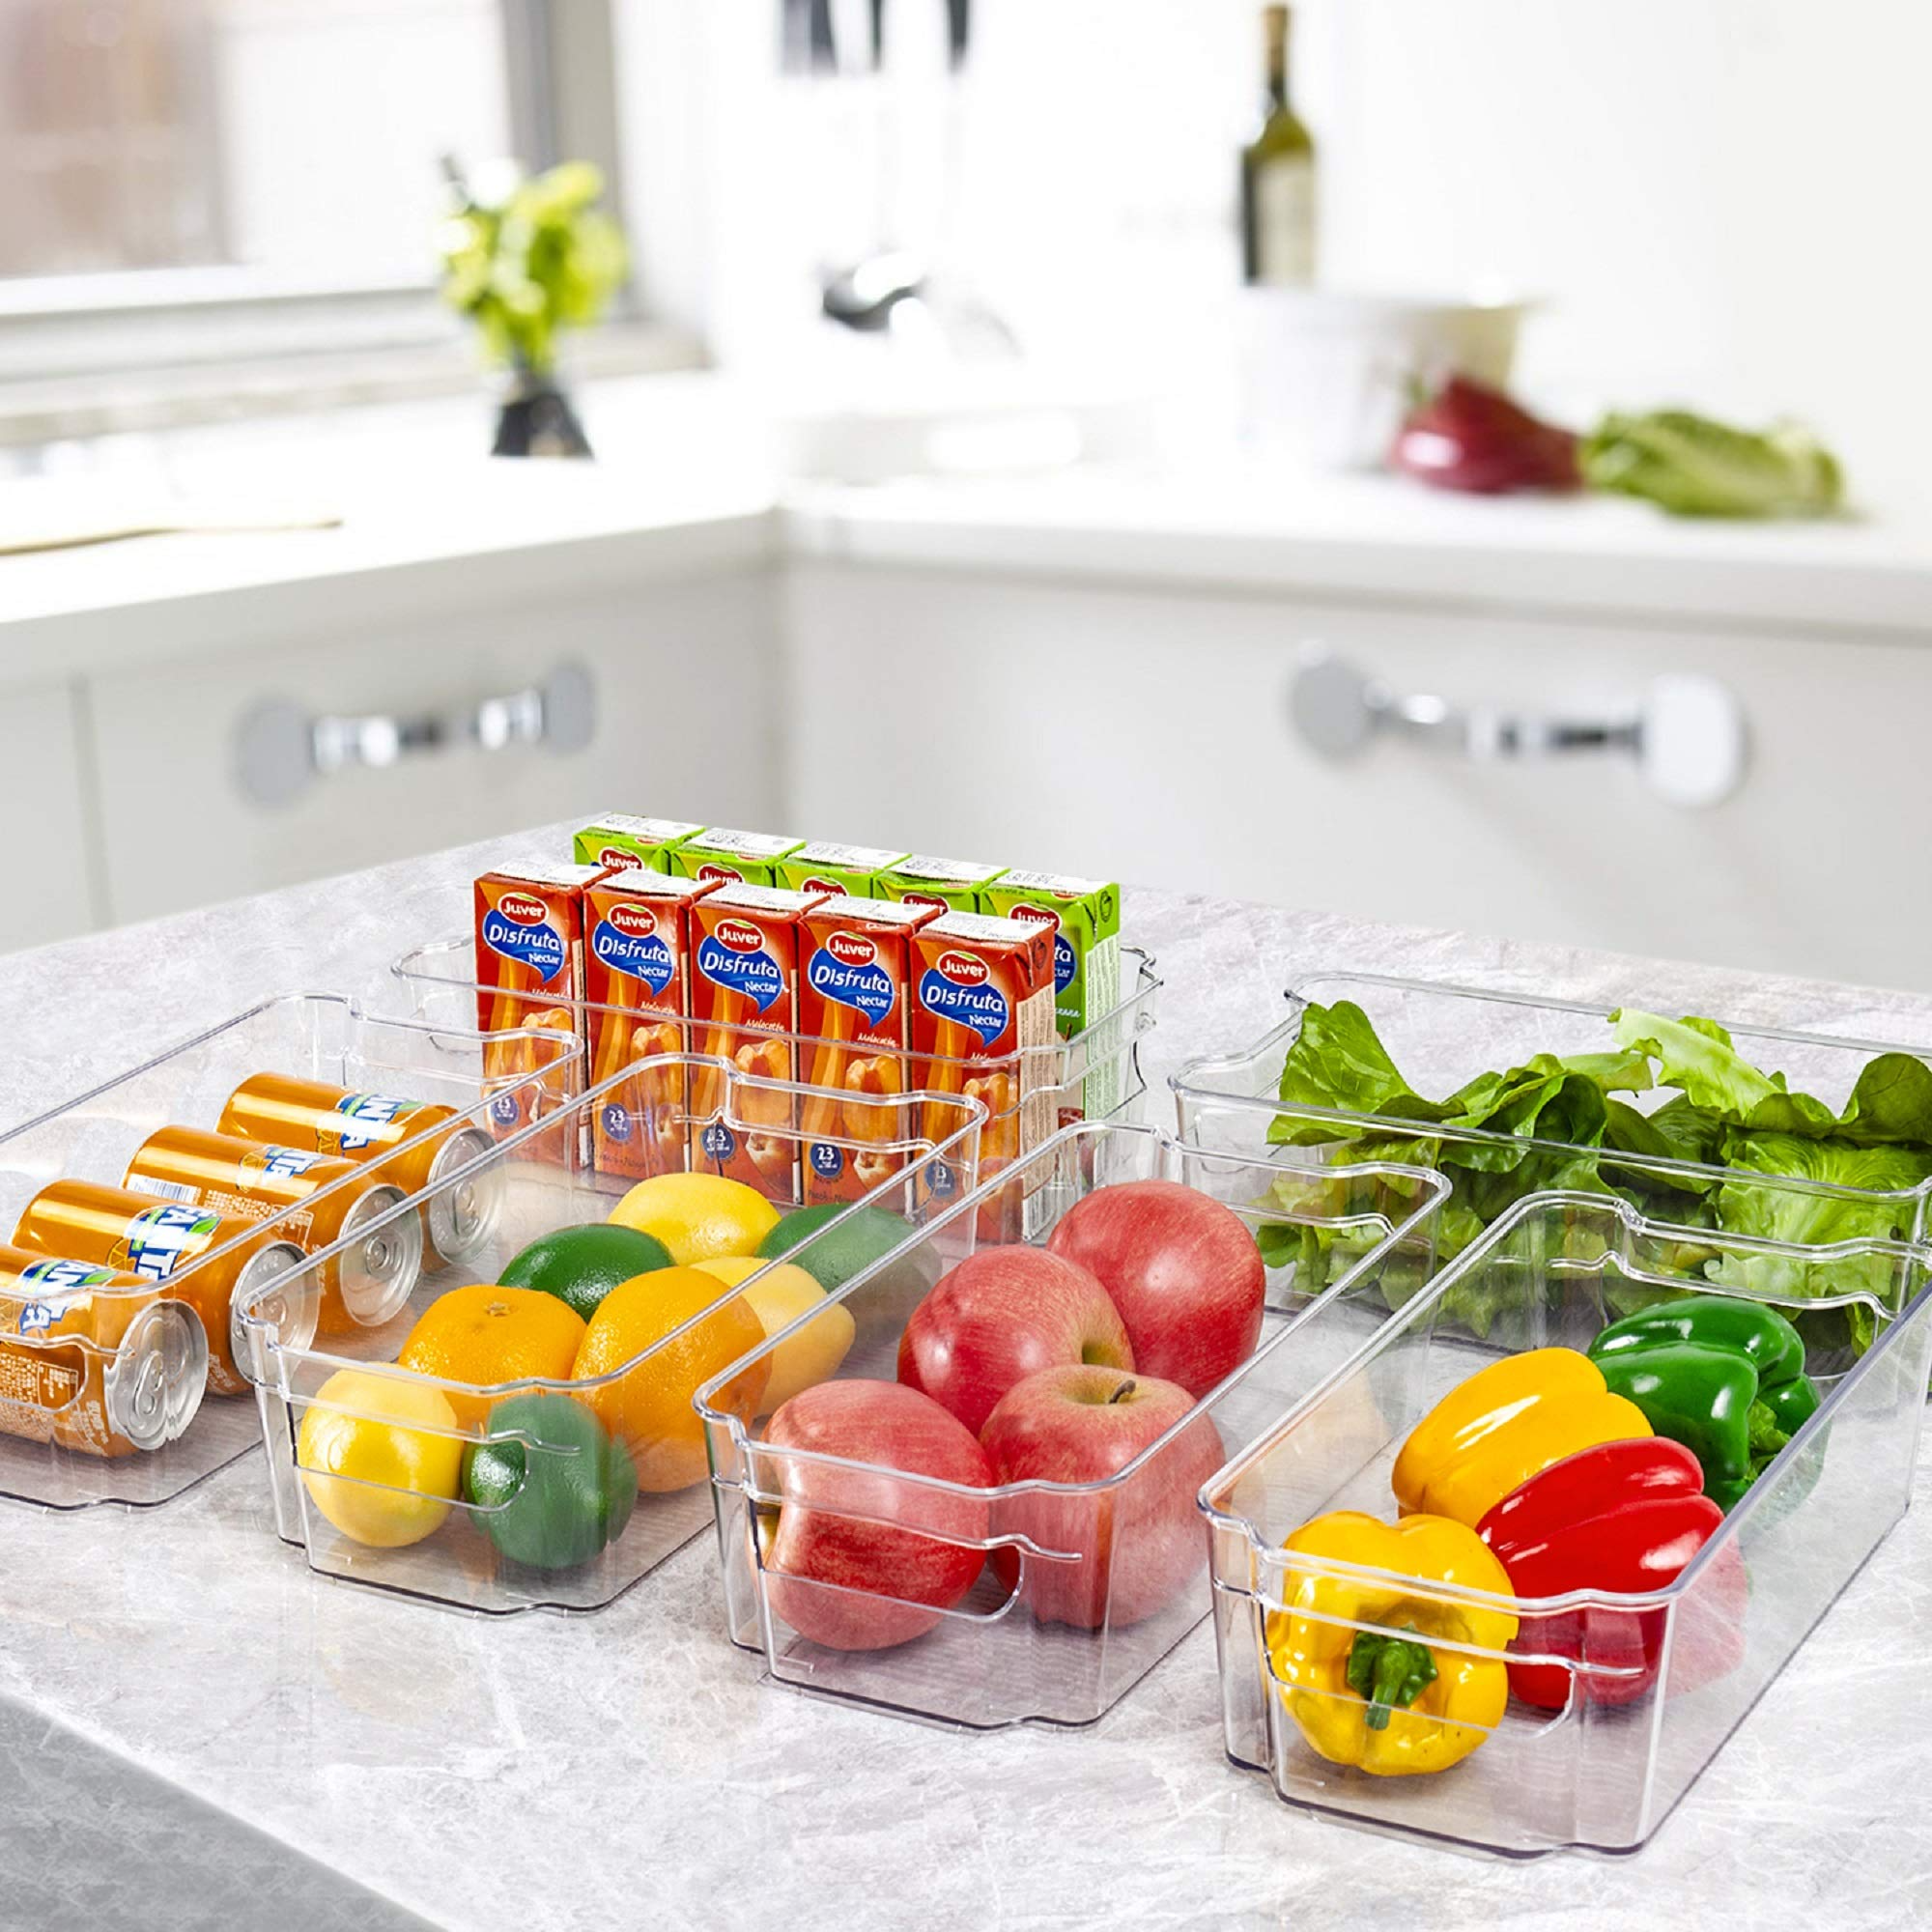 YIHONG Clear Pantry Storage Organizer Bins, 6 Pack Plastic Storage  Containers with Handle for Kitchen,Refrigerator,  Freezer,Cabinet,Closet,Bathroom